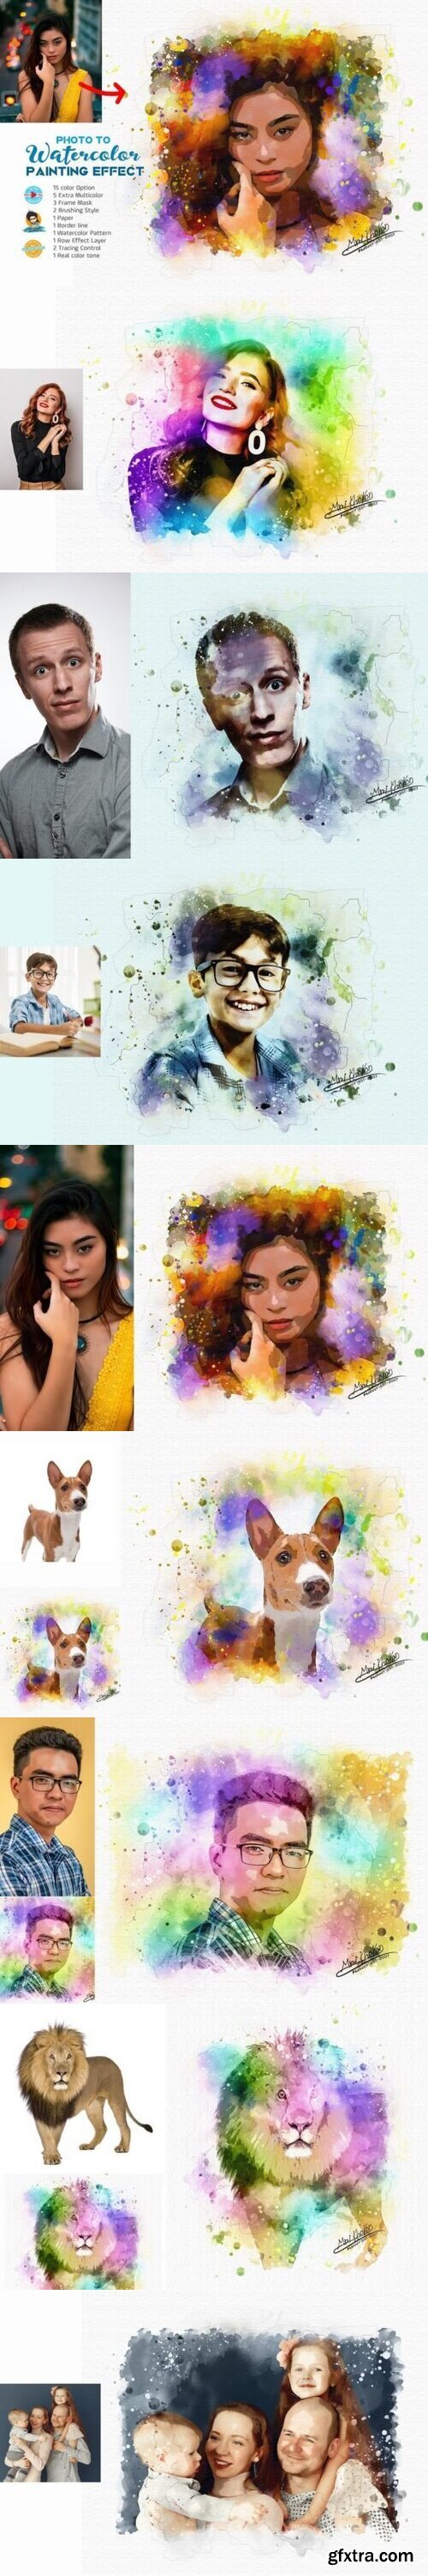 Photo to Watercolor Painting Effect